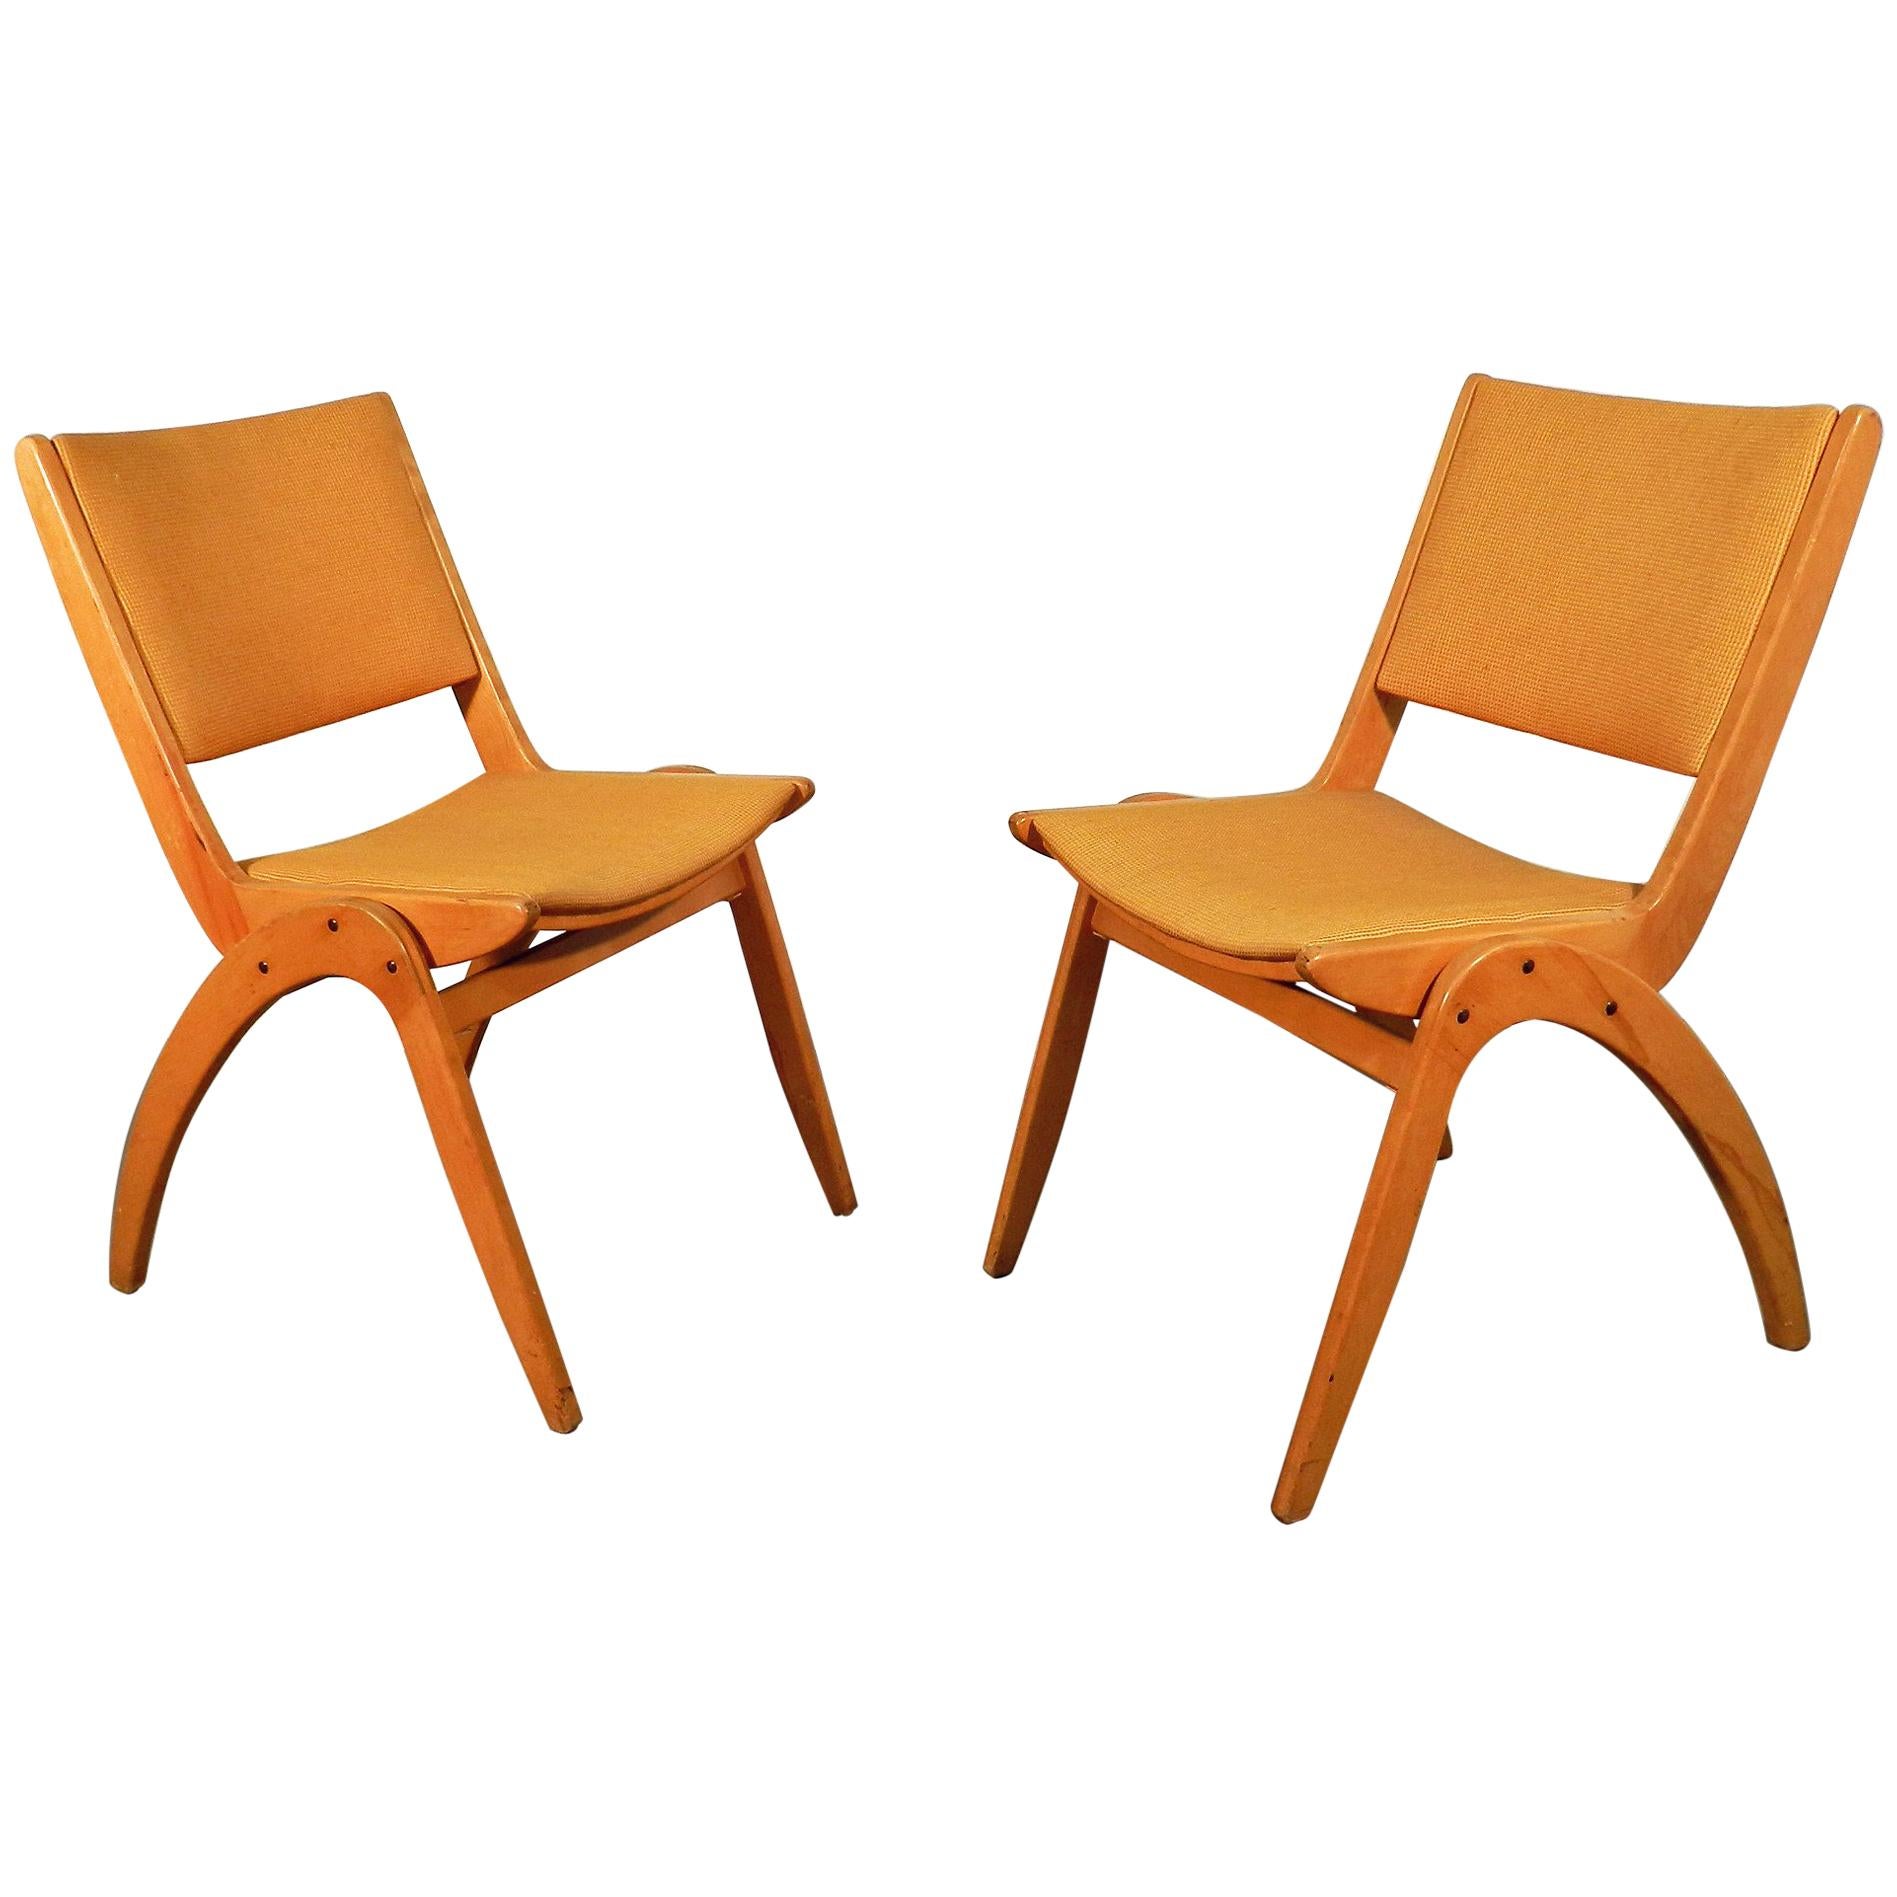 Pair of Vintage Chairs, circa 1950-1960